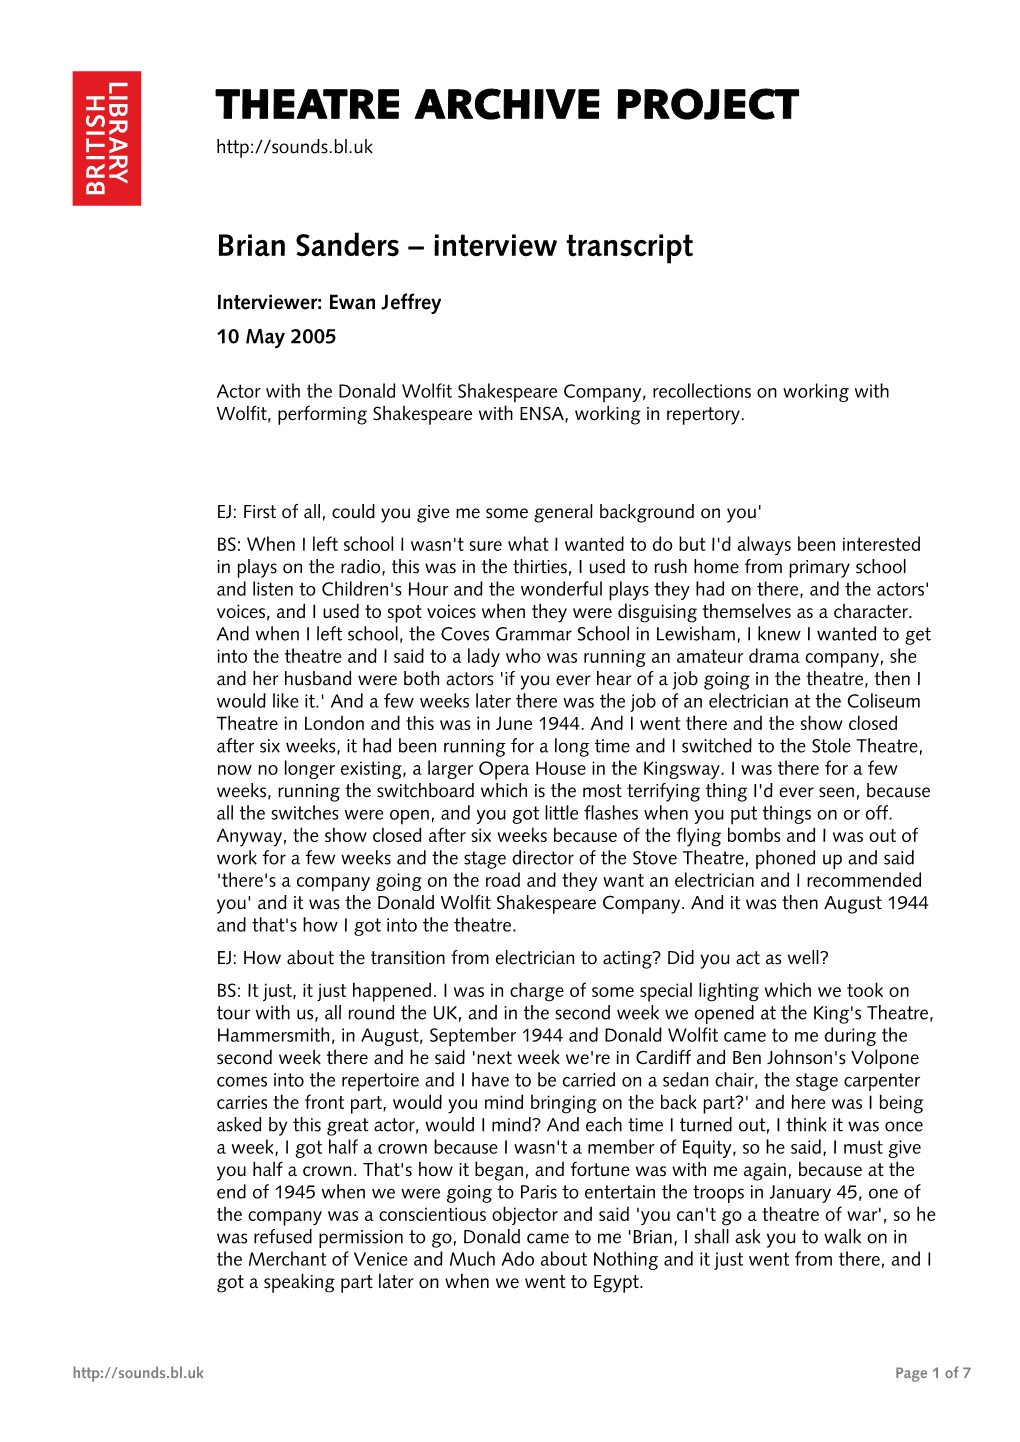 Theatre Archive Project: Interview with Brian Sanders